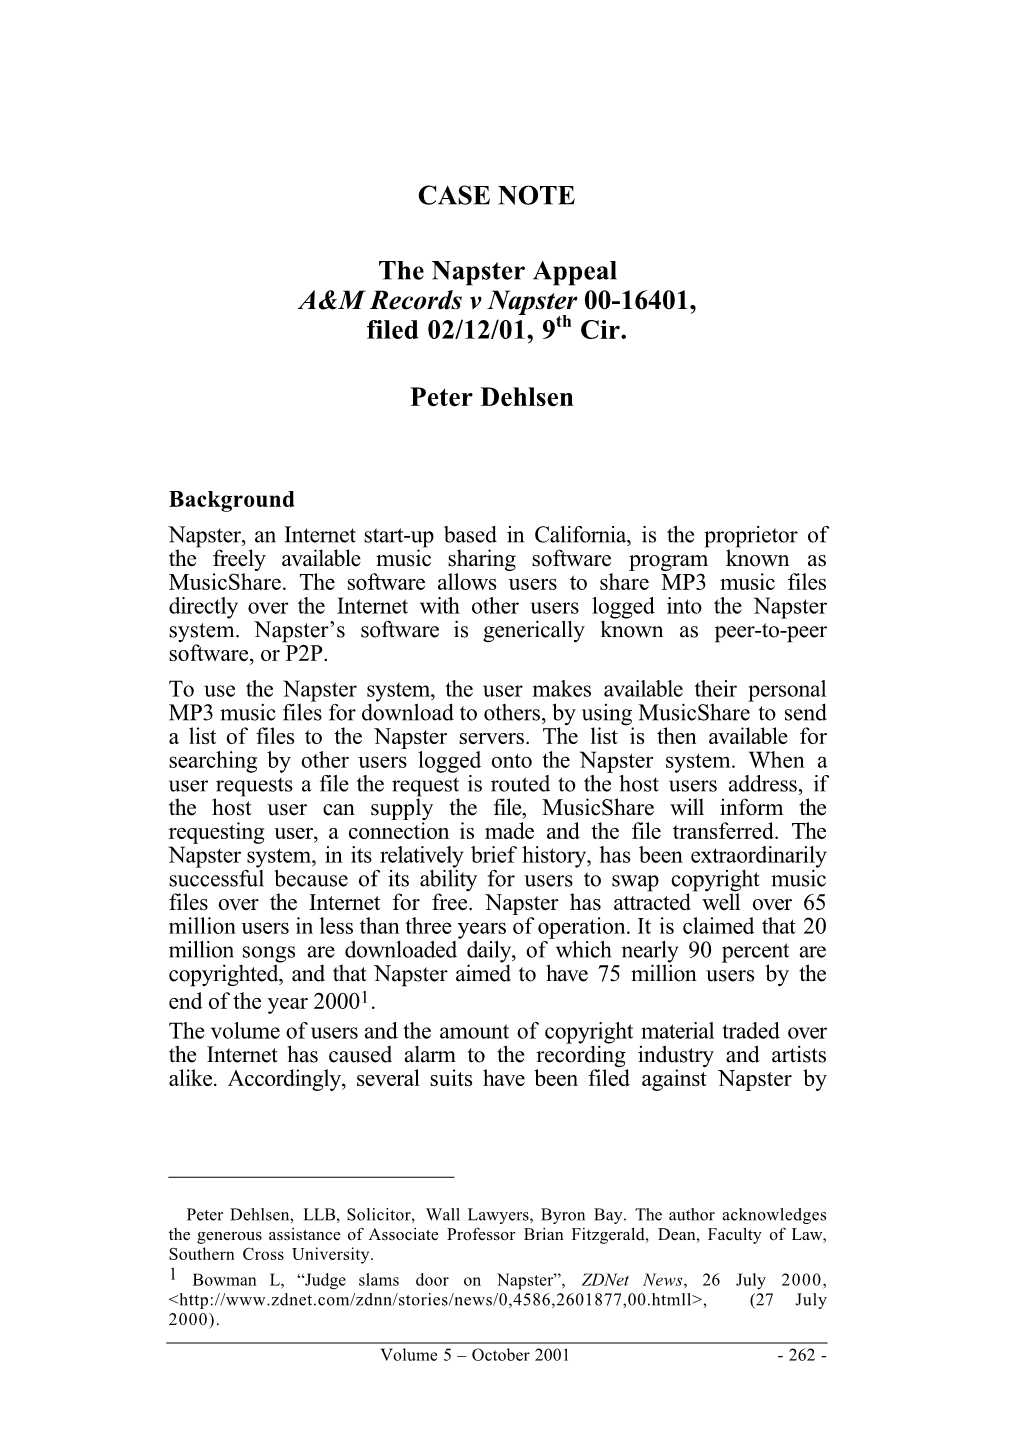 CASE NOTE the Napster Appeal A&M Records V Napster 00-16401, Filed 02/12/01, 9 Cir. Peter Dehlsen∗